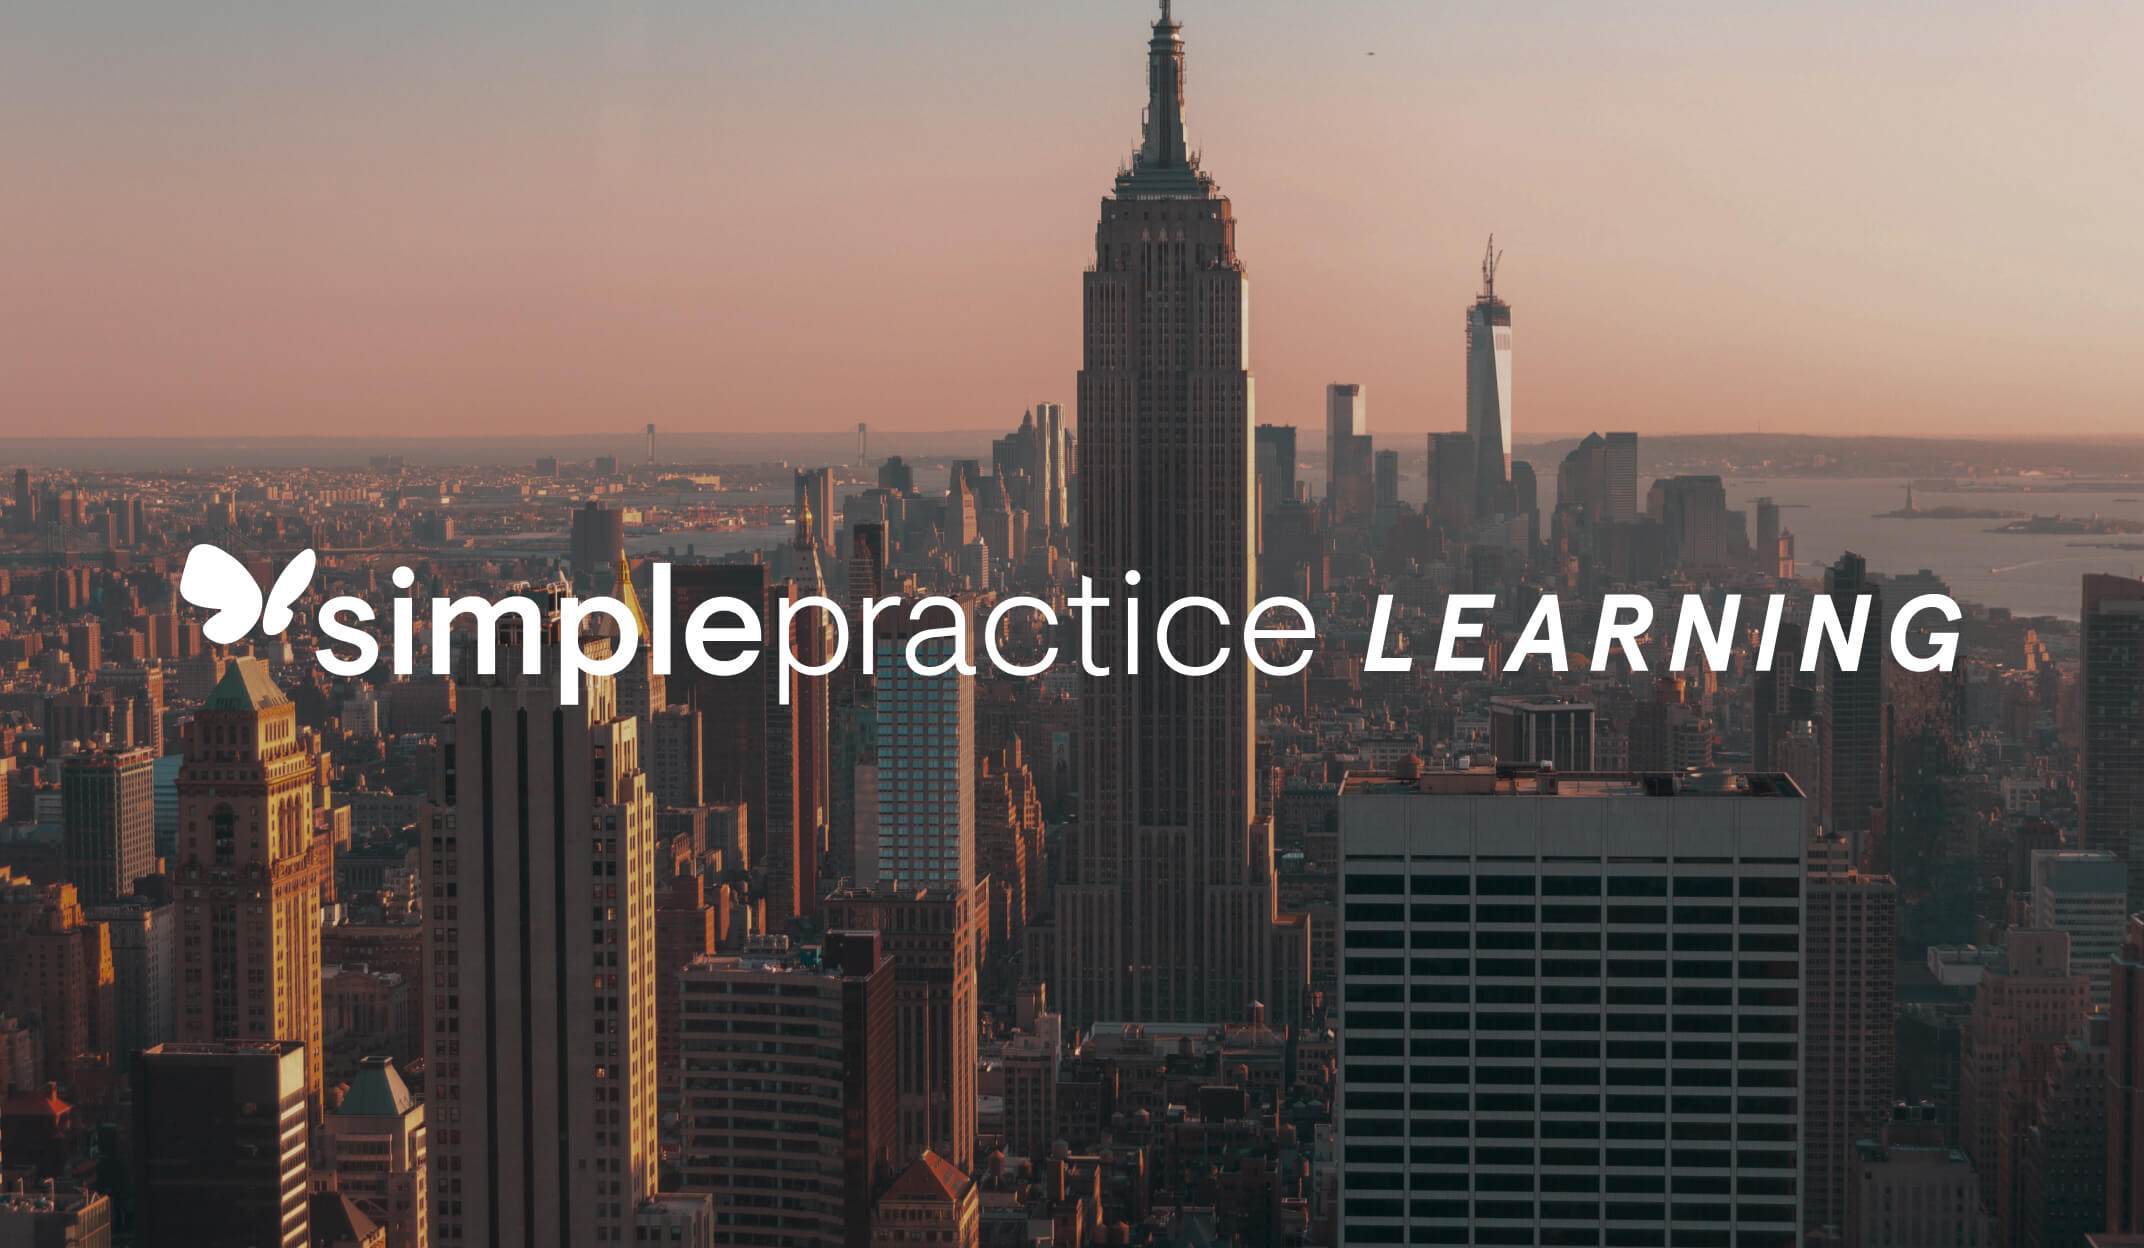 simplepractice learning approved as continuing education provider for new york